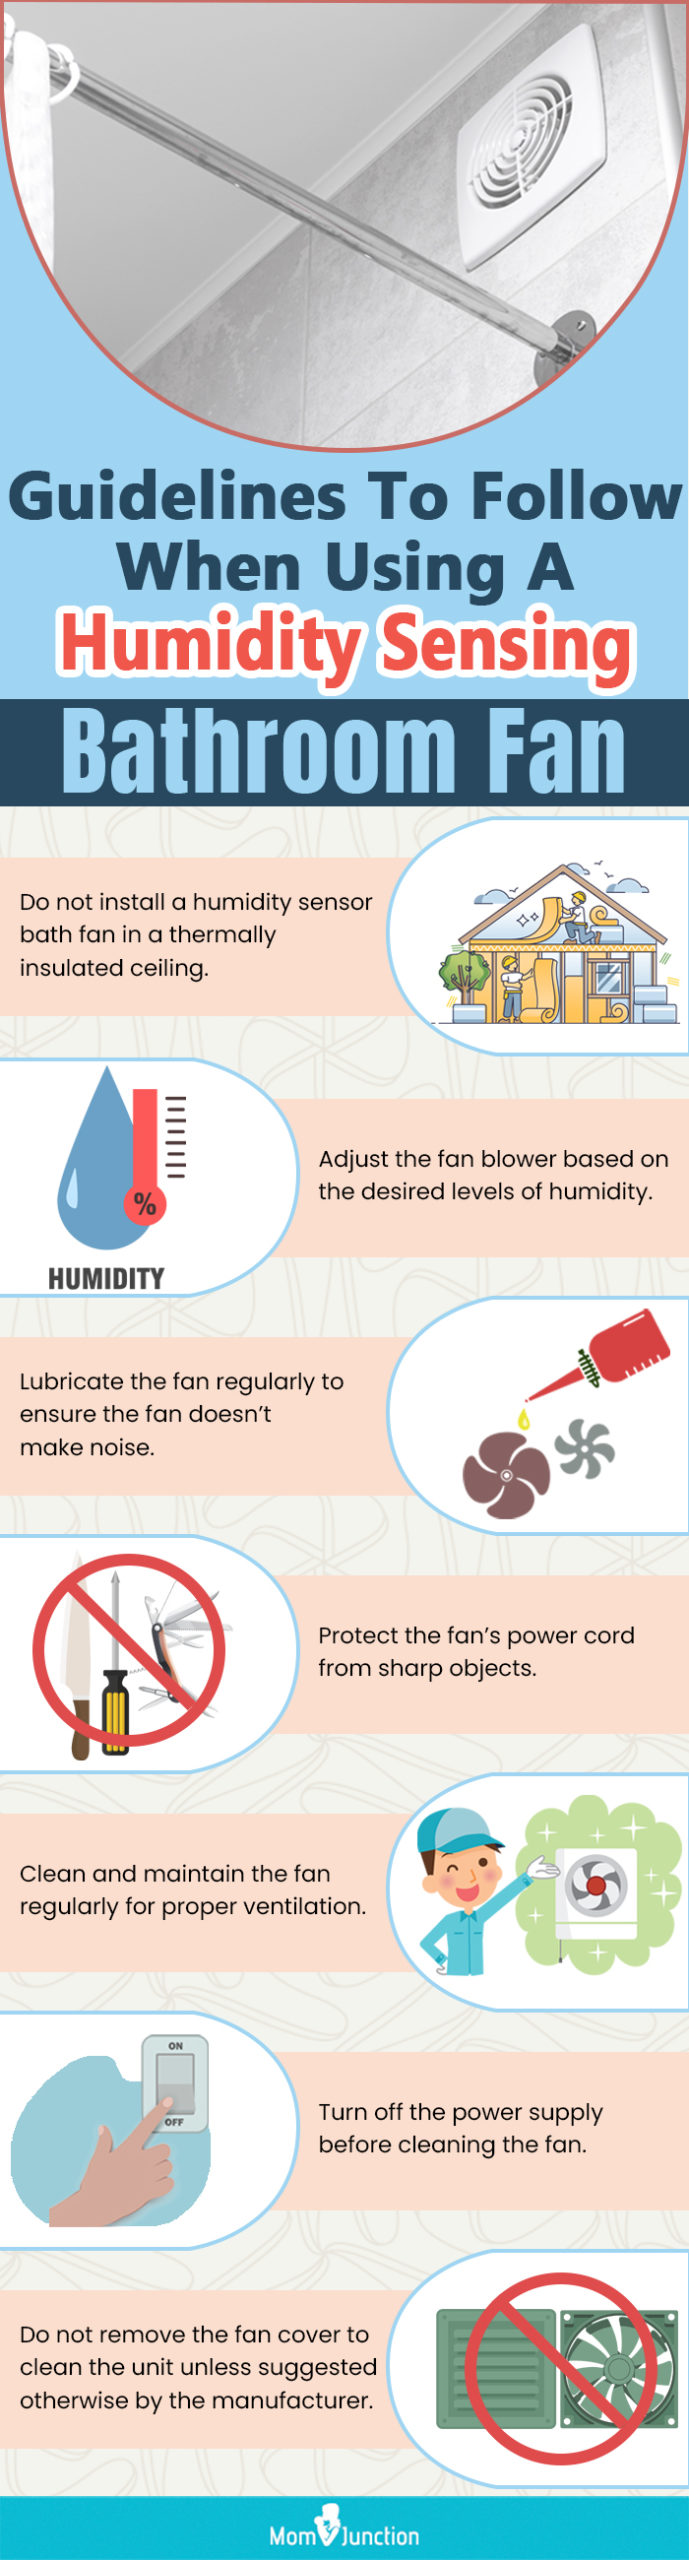 Guidelines To Follow When Using A Humidity Sensing Bathroom Fan (infographic)